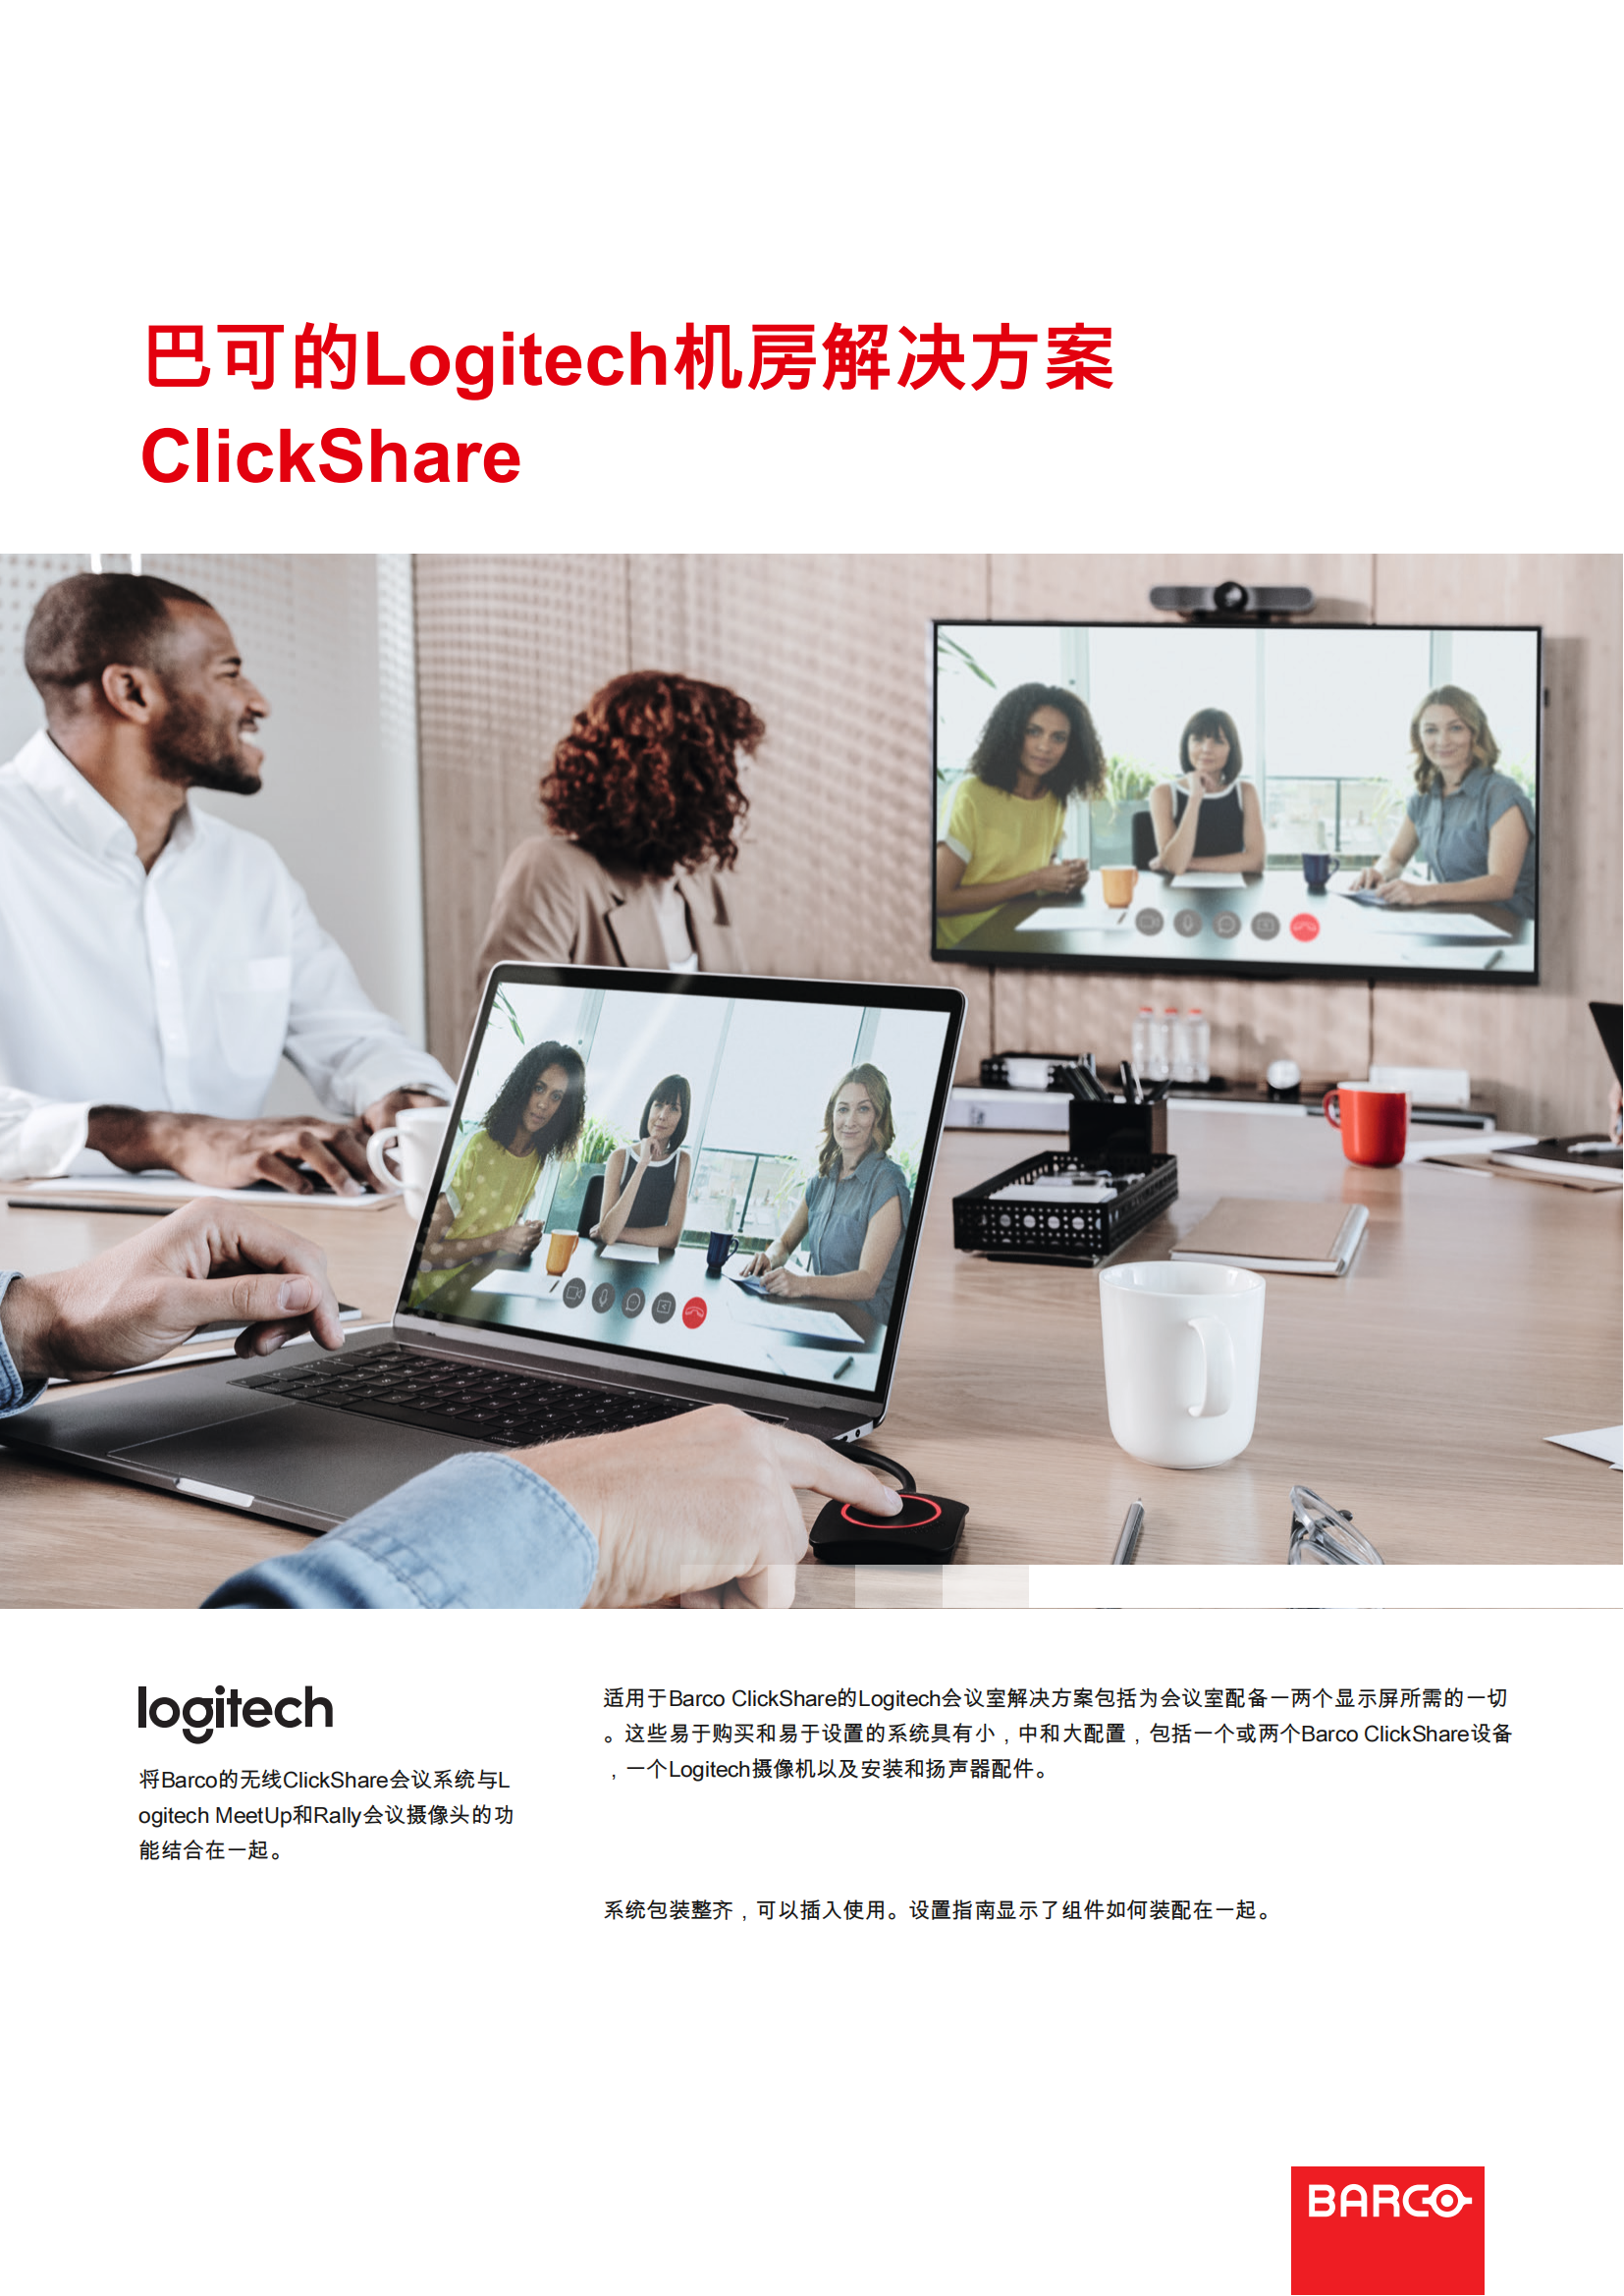 barco-clickshare-room-solutions_00.png